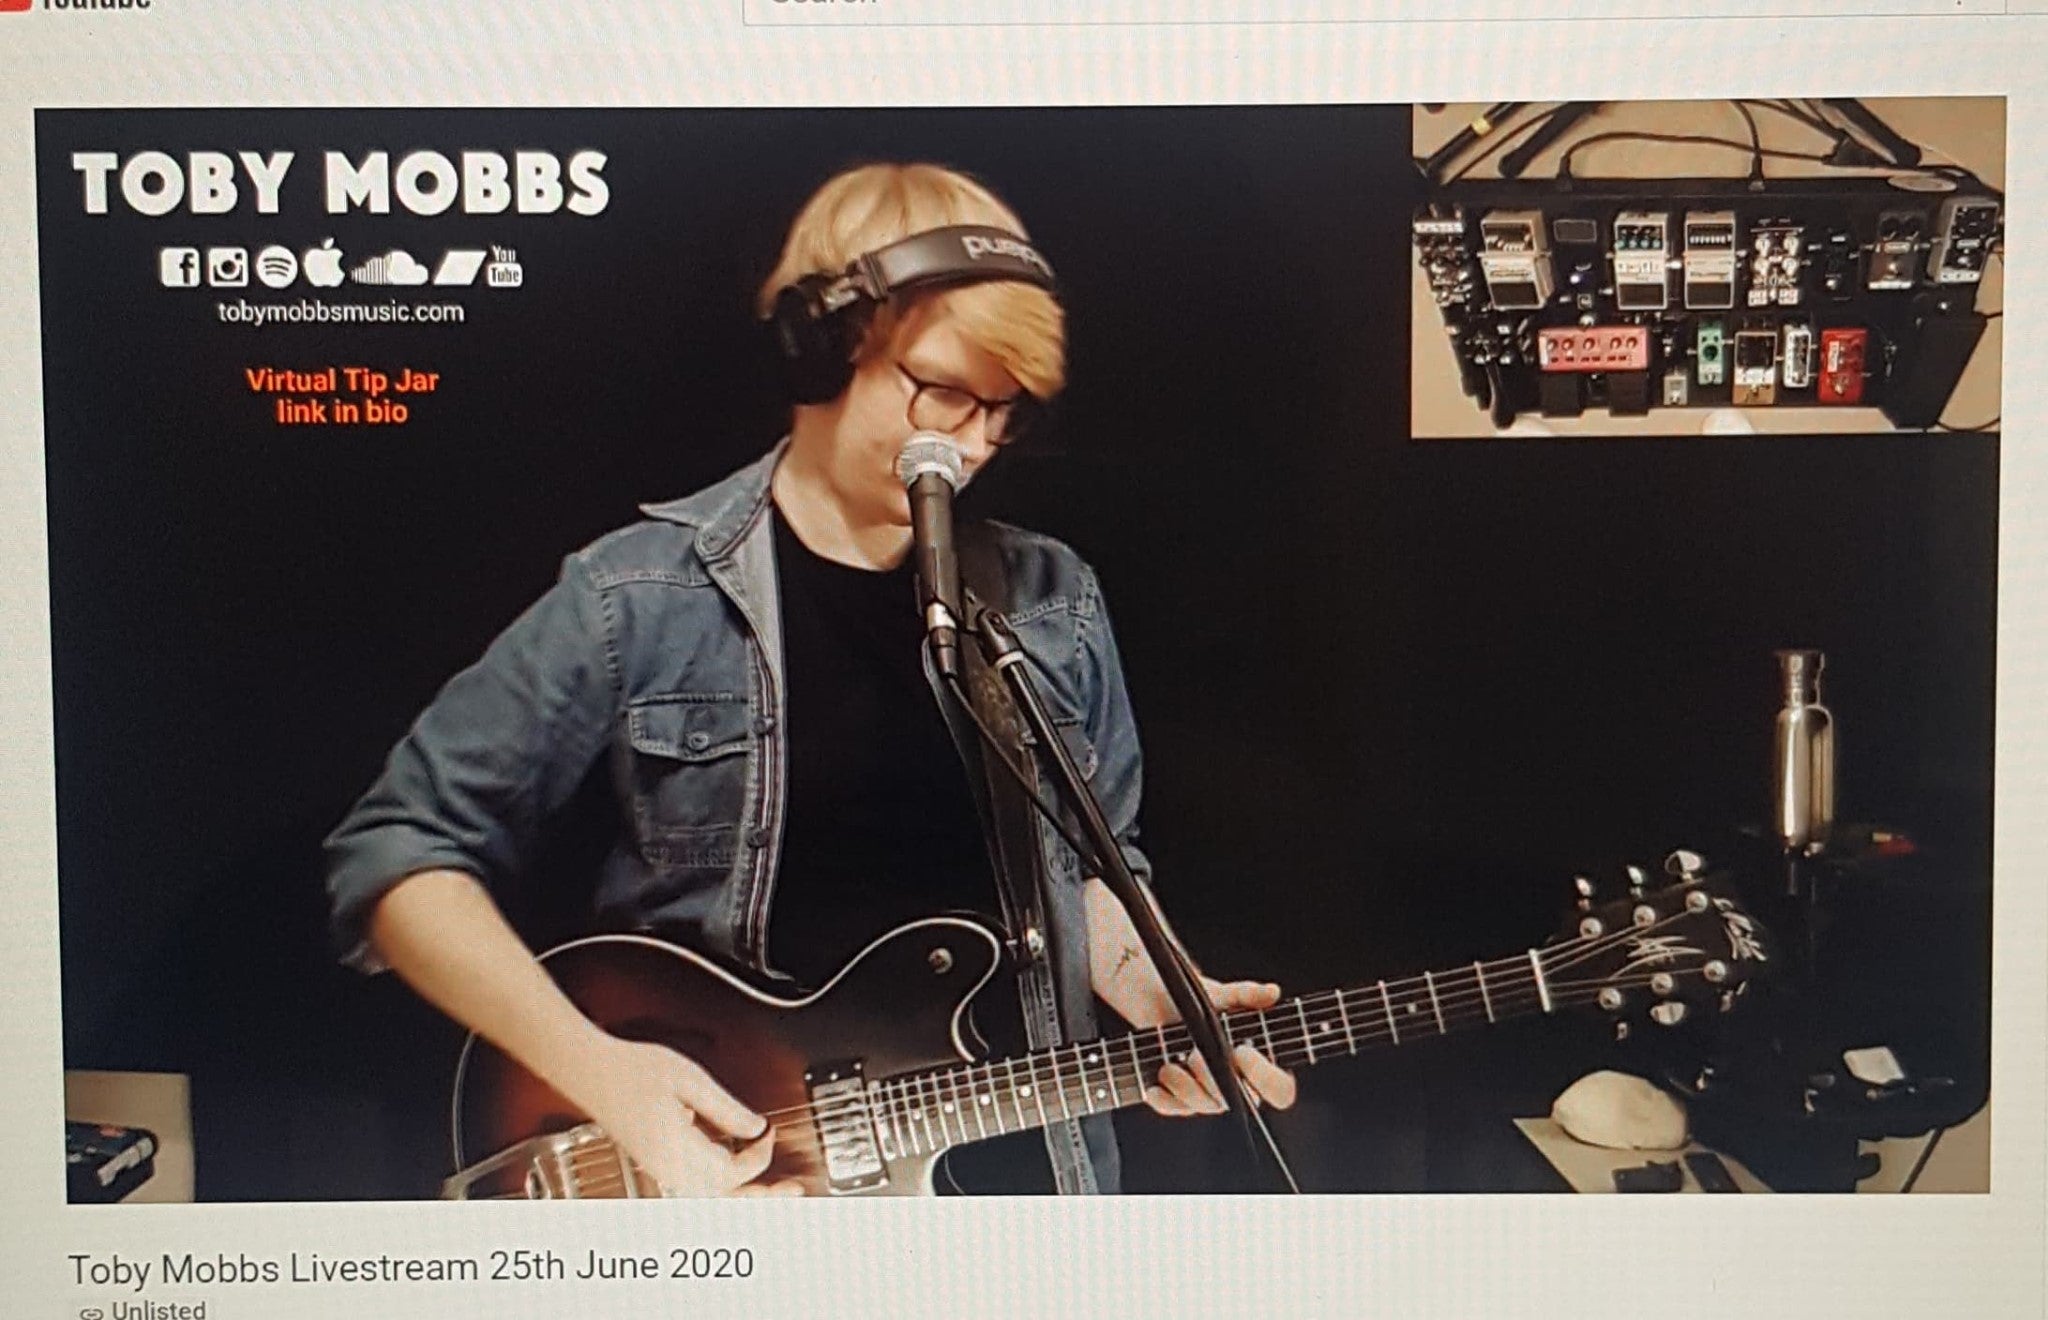 Toby Mobbs - Sunday 30 August